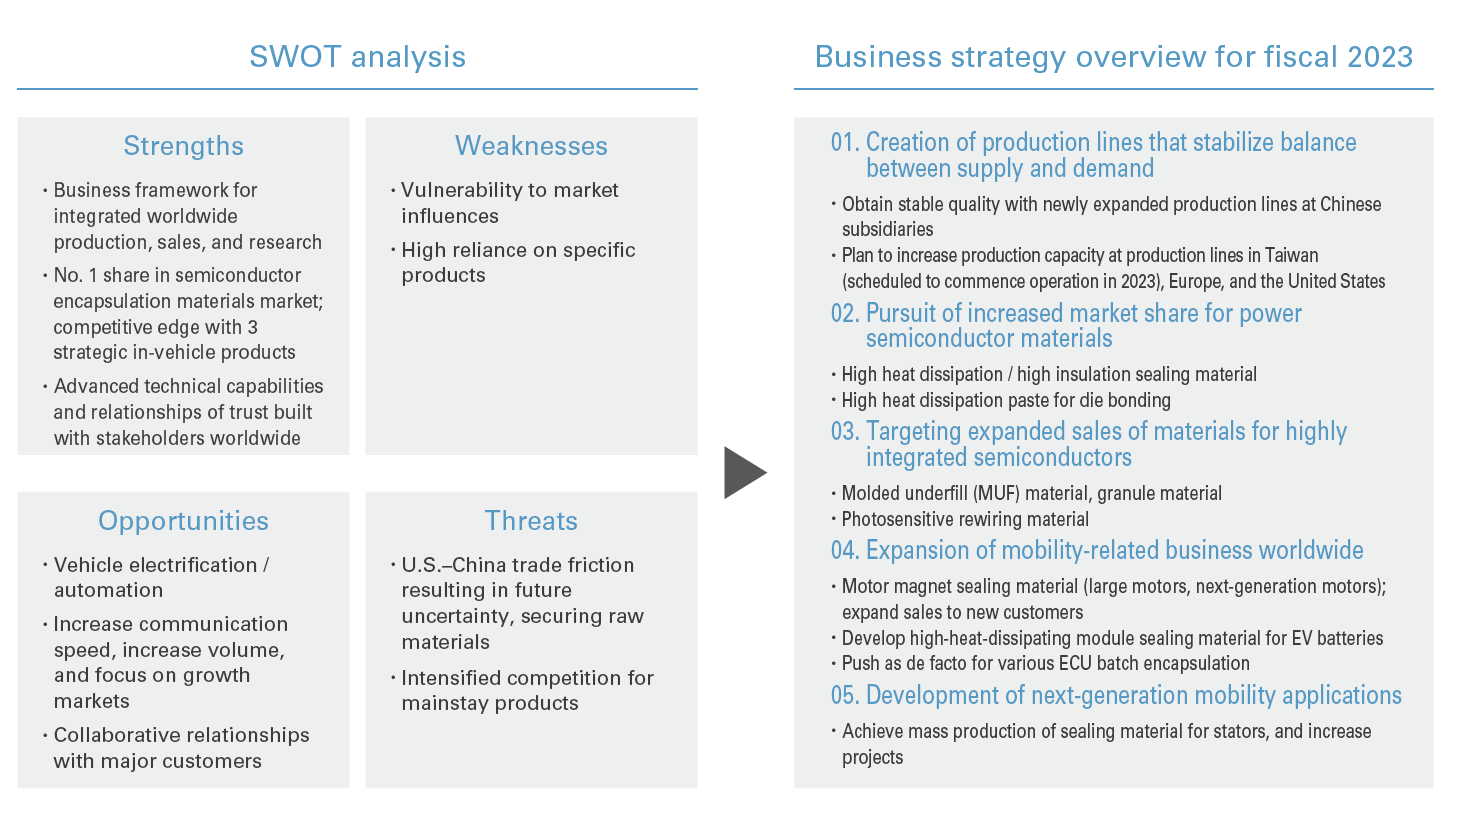 SWOT analysis/Business strategy overview for fiscal 2023